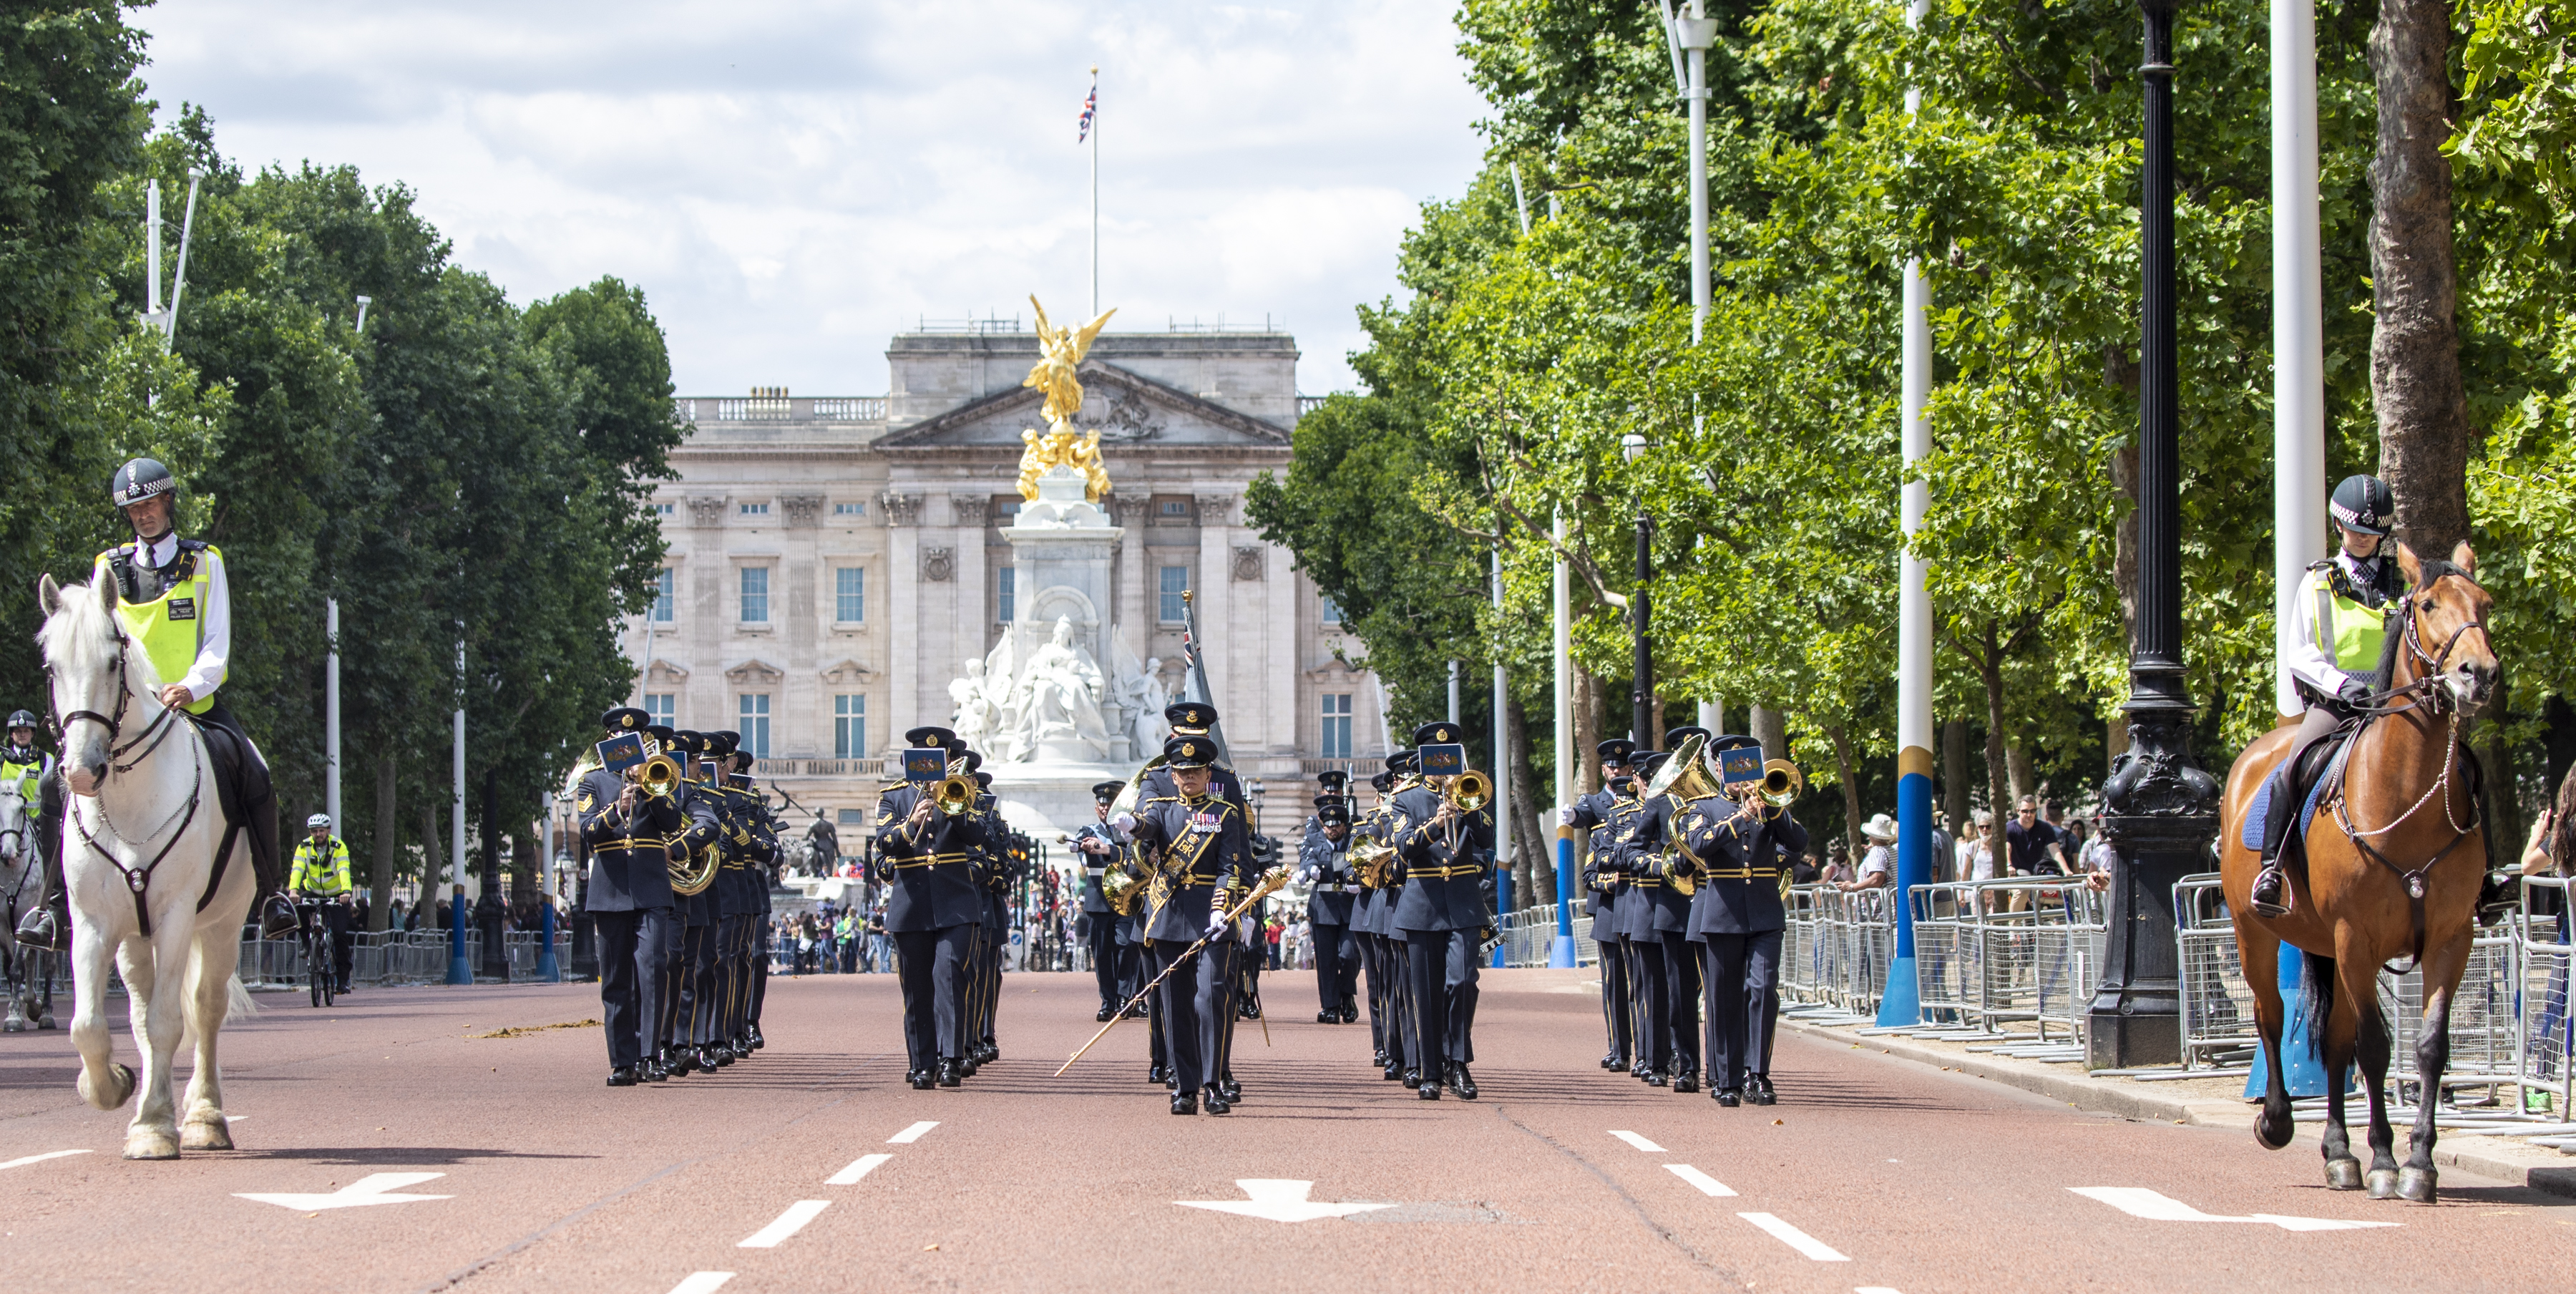 Central Band of the RAF marching down the Mall